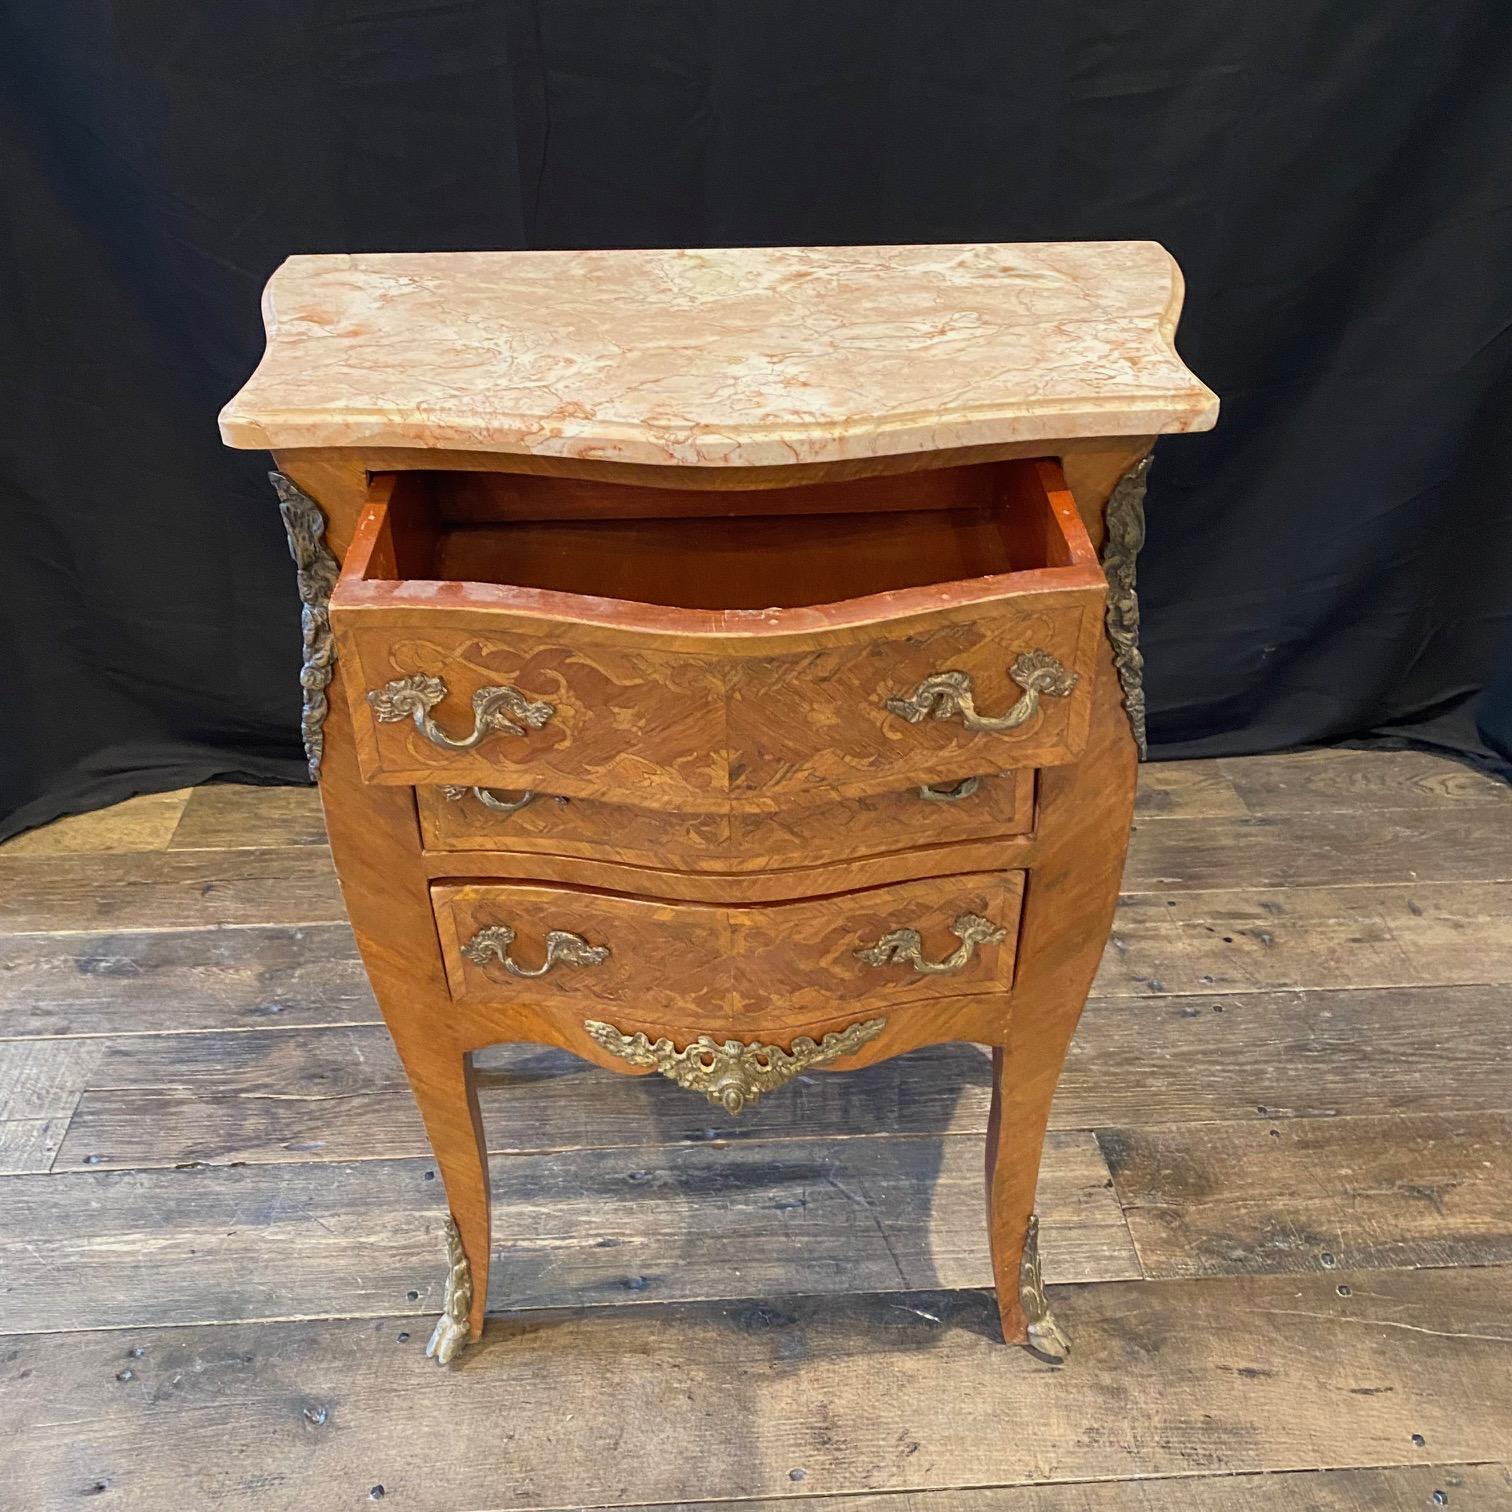 A petite Louis XV period serpentine commode with shaped front and having original shaped marble beveled top mounted with a lovely mottled beige marble top, gilt-bronze mounts and hardware throughout, three drawers and ending in gorgeous bronze